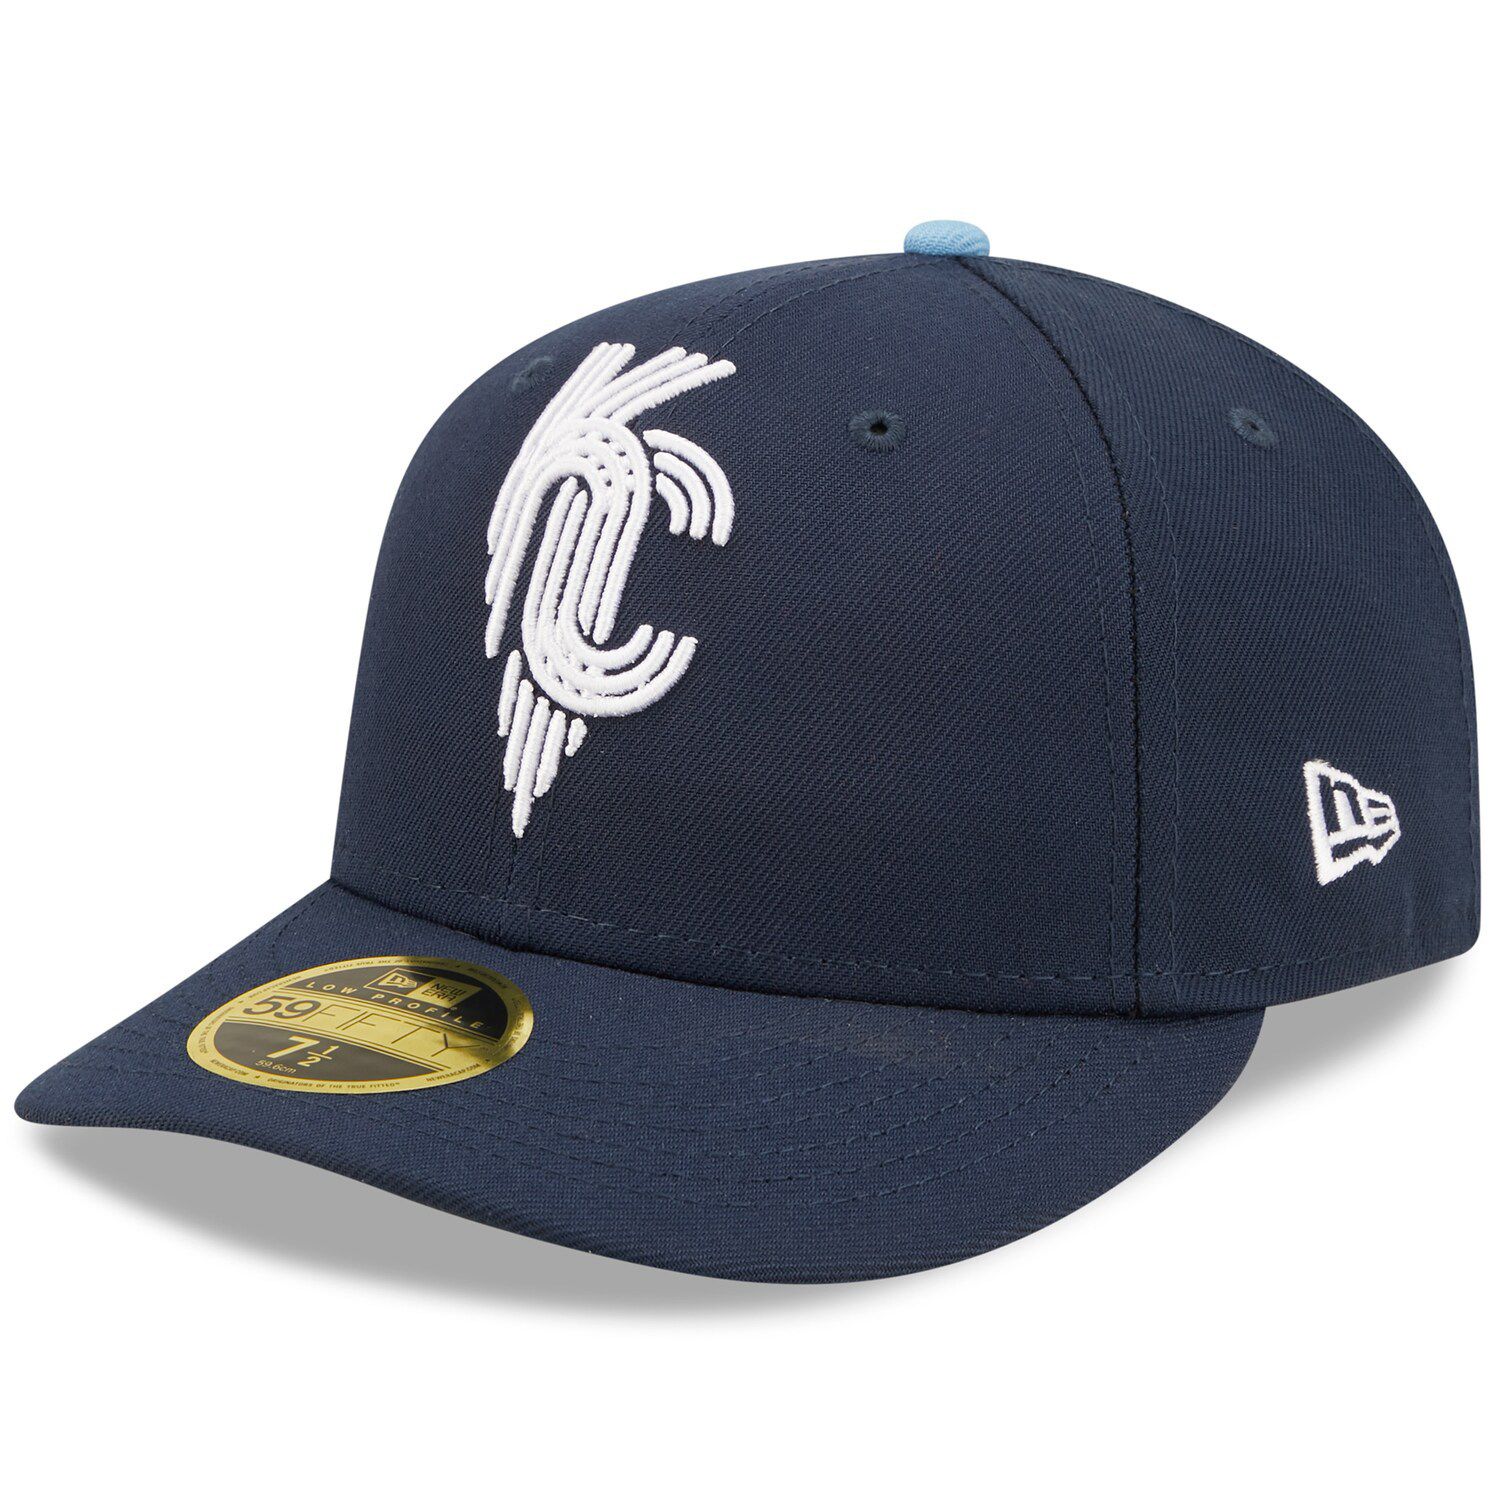 Men's Fanatics Branded Light Blue/Royal Kansas City Royals Iconic Multi  Patch Fitted Hat